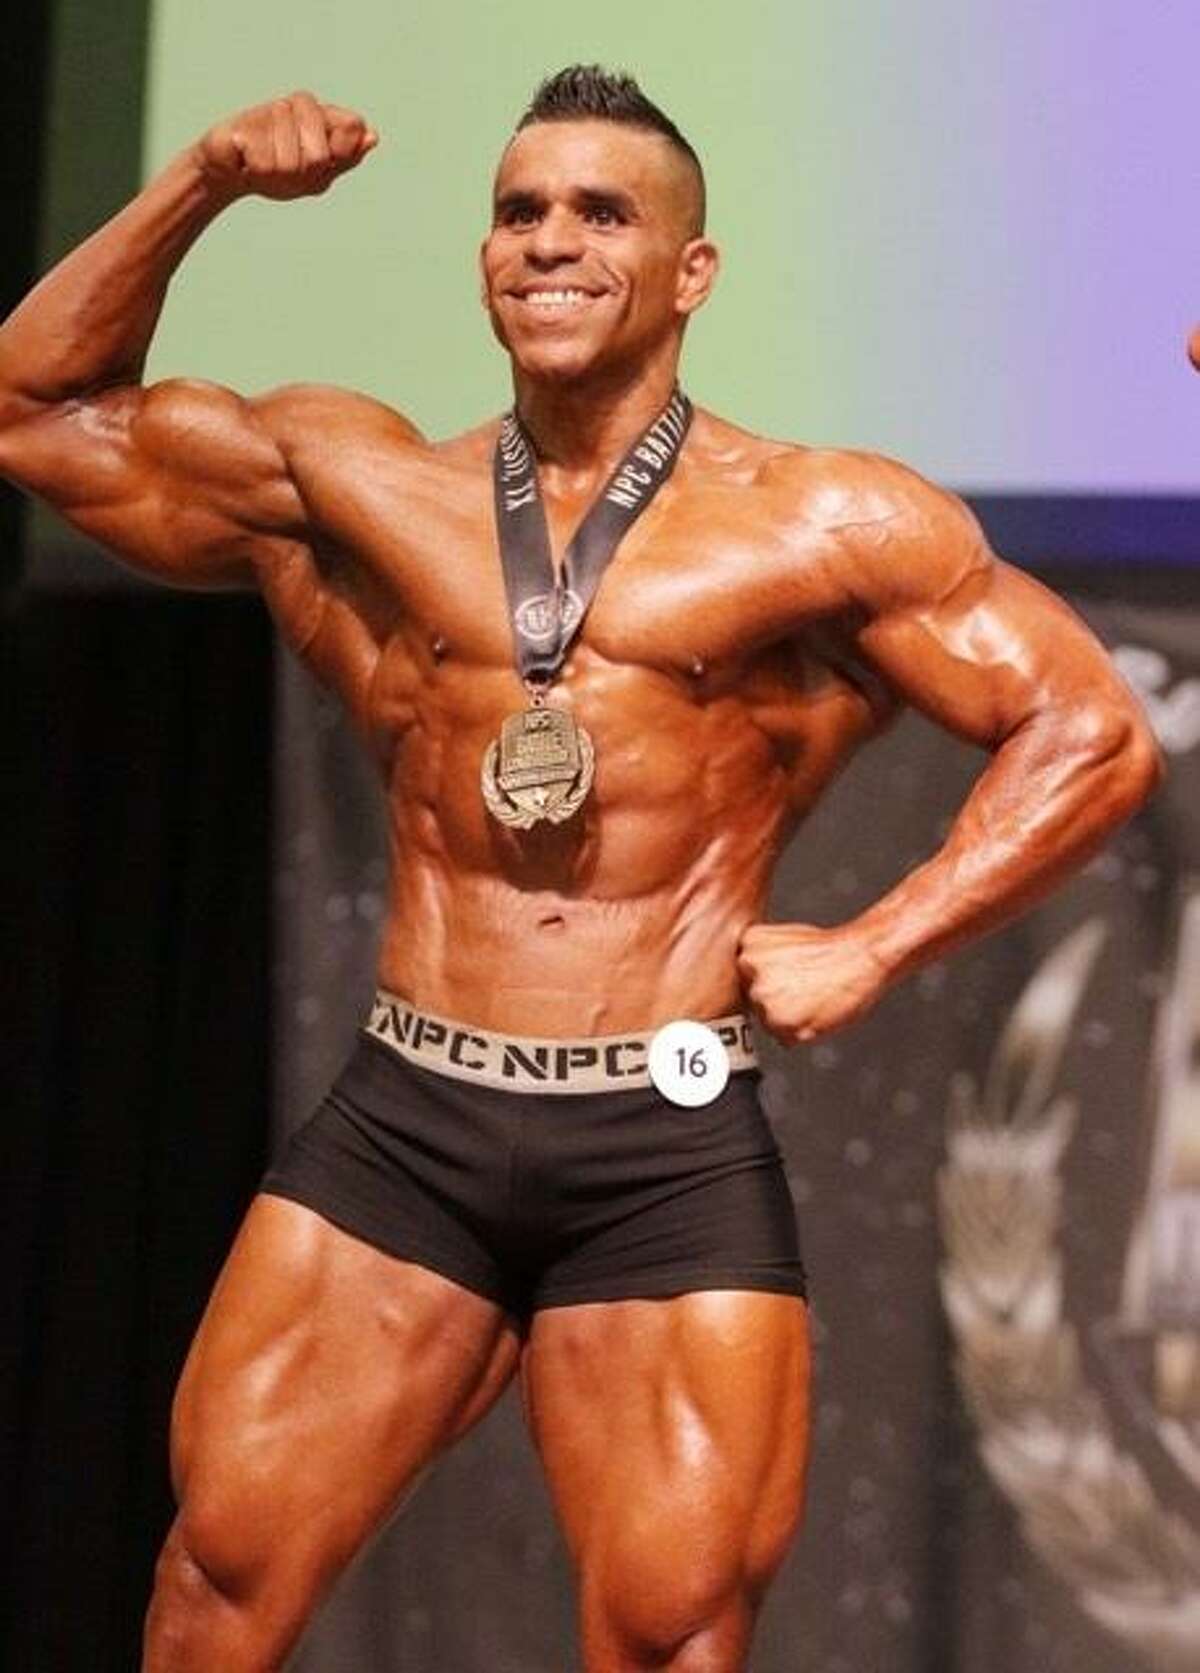 Jerry "Flex" Aguilar celebrates from winning classic physique last year at the Battle on the Bay. Aguilar impressed again in Corpus Christi as the Laredoan won the men's open light heavyweight division at the 2017 NPC Battle on the Bay.